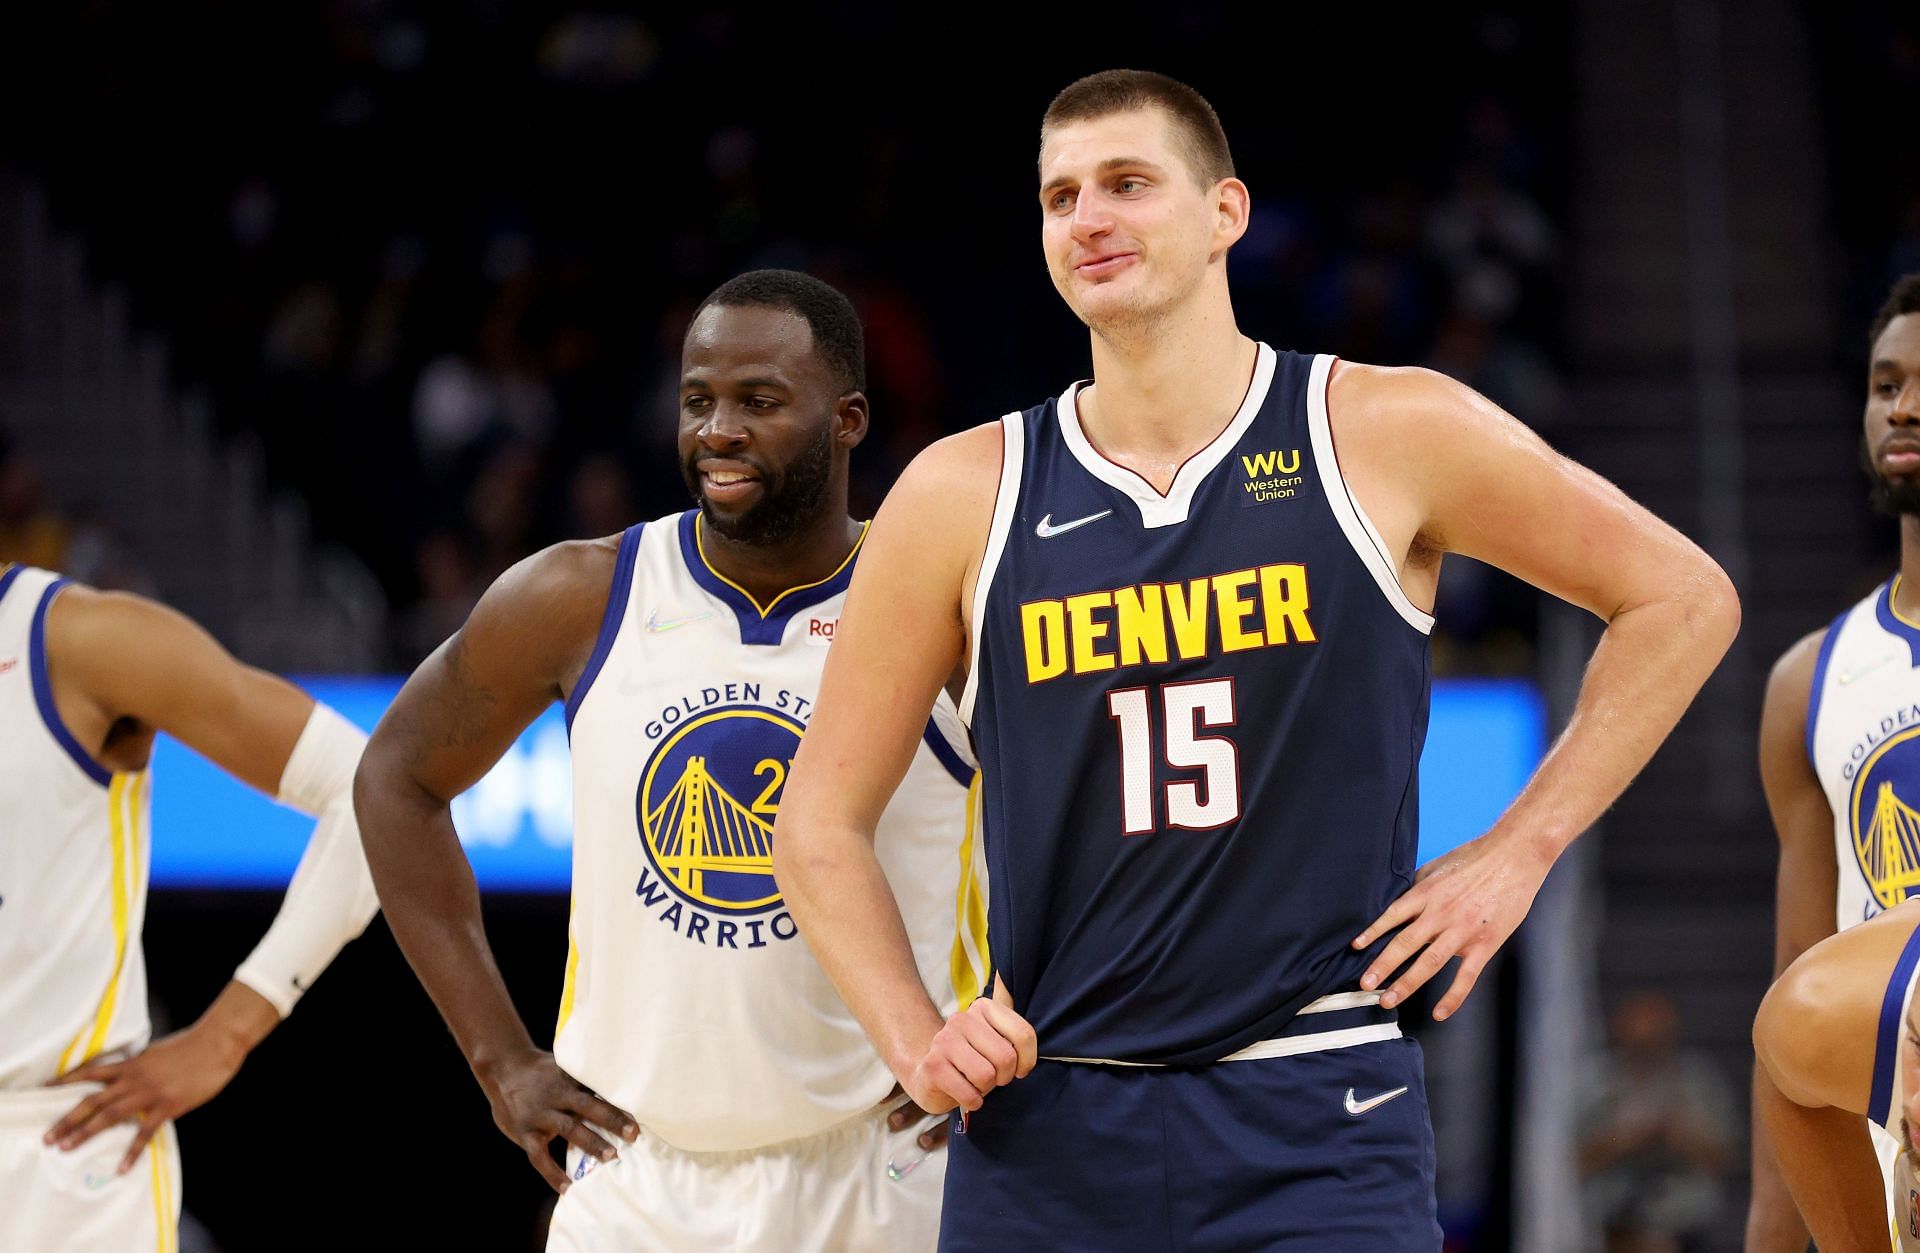 Draymond Green's moment with Nikola Jokić after shredding his defense on TV  - Basketball Network - Your daily dose of basketball